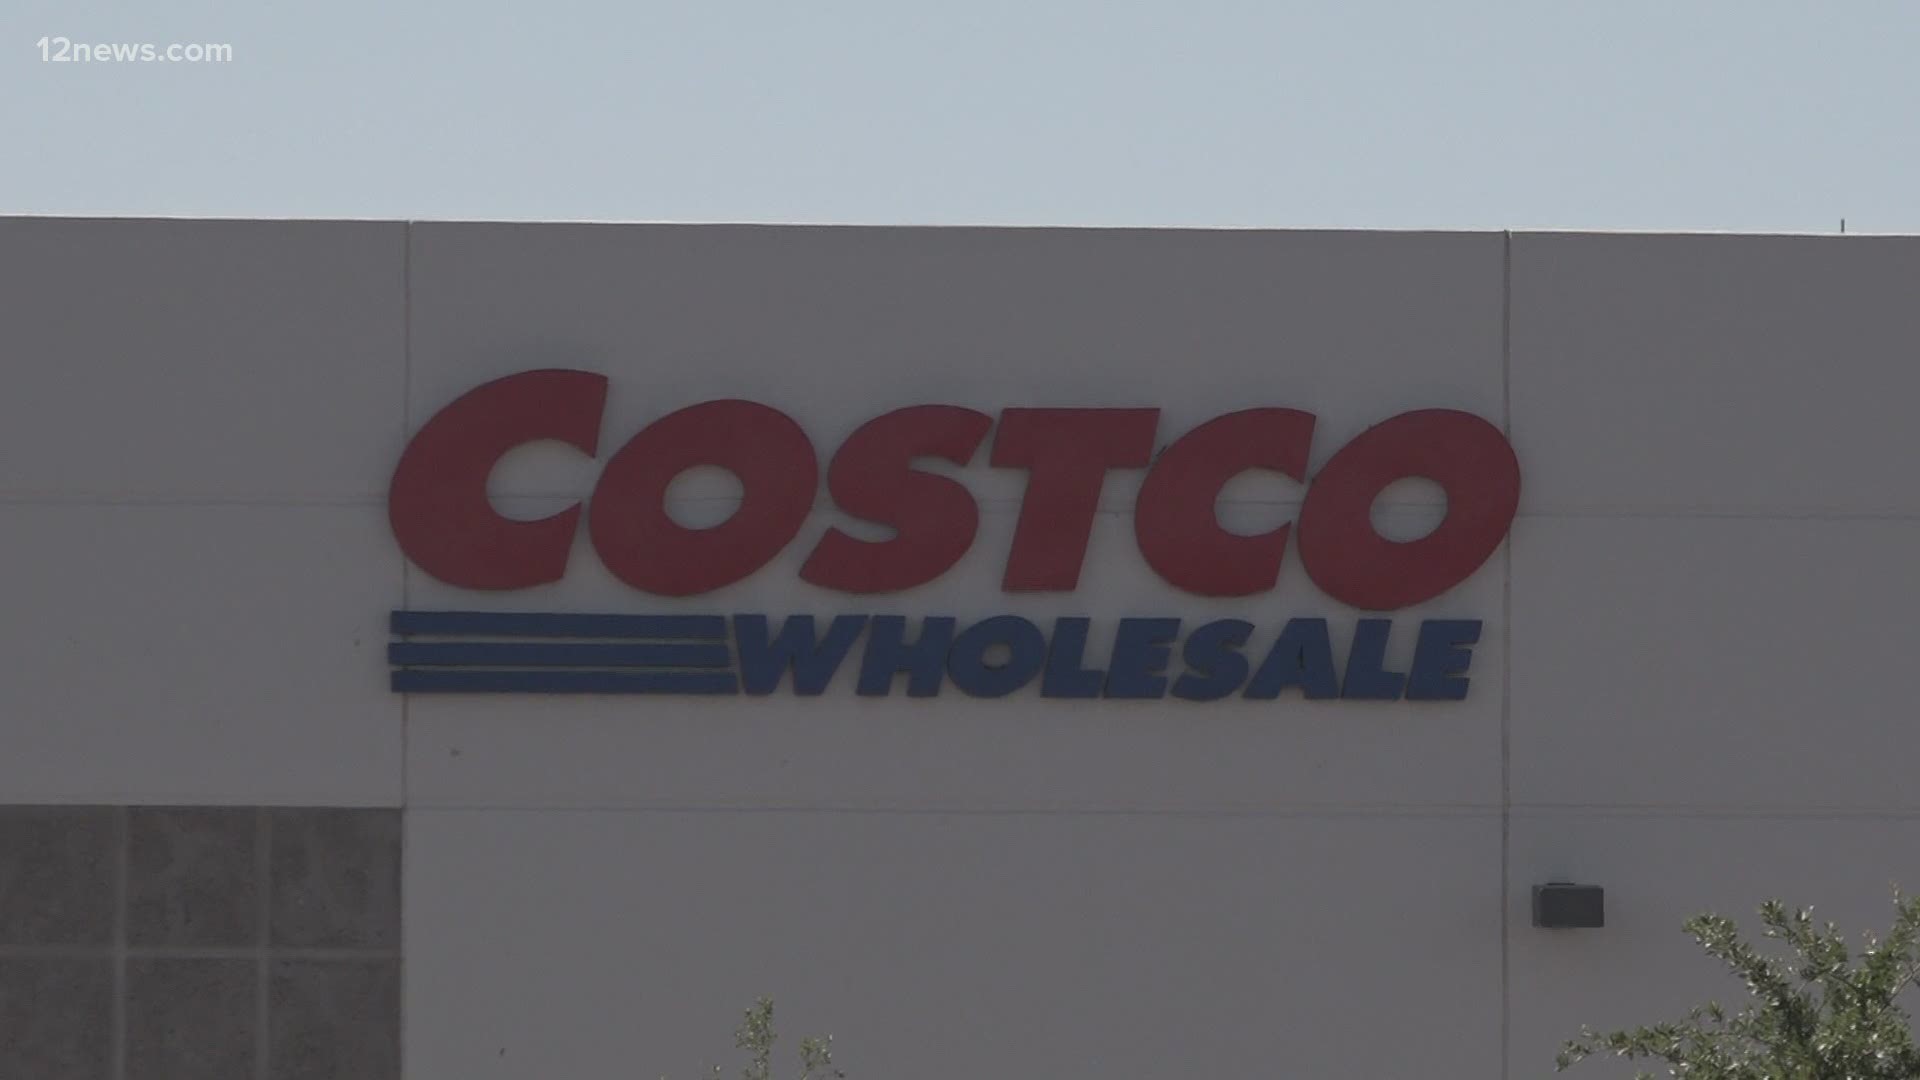 Starting Monday, May 4, most Costco locations in the U.S. will return to normal operating hours but customers will be required to wear masks.